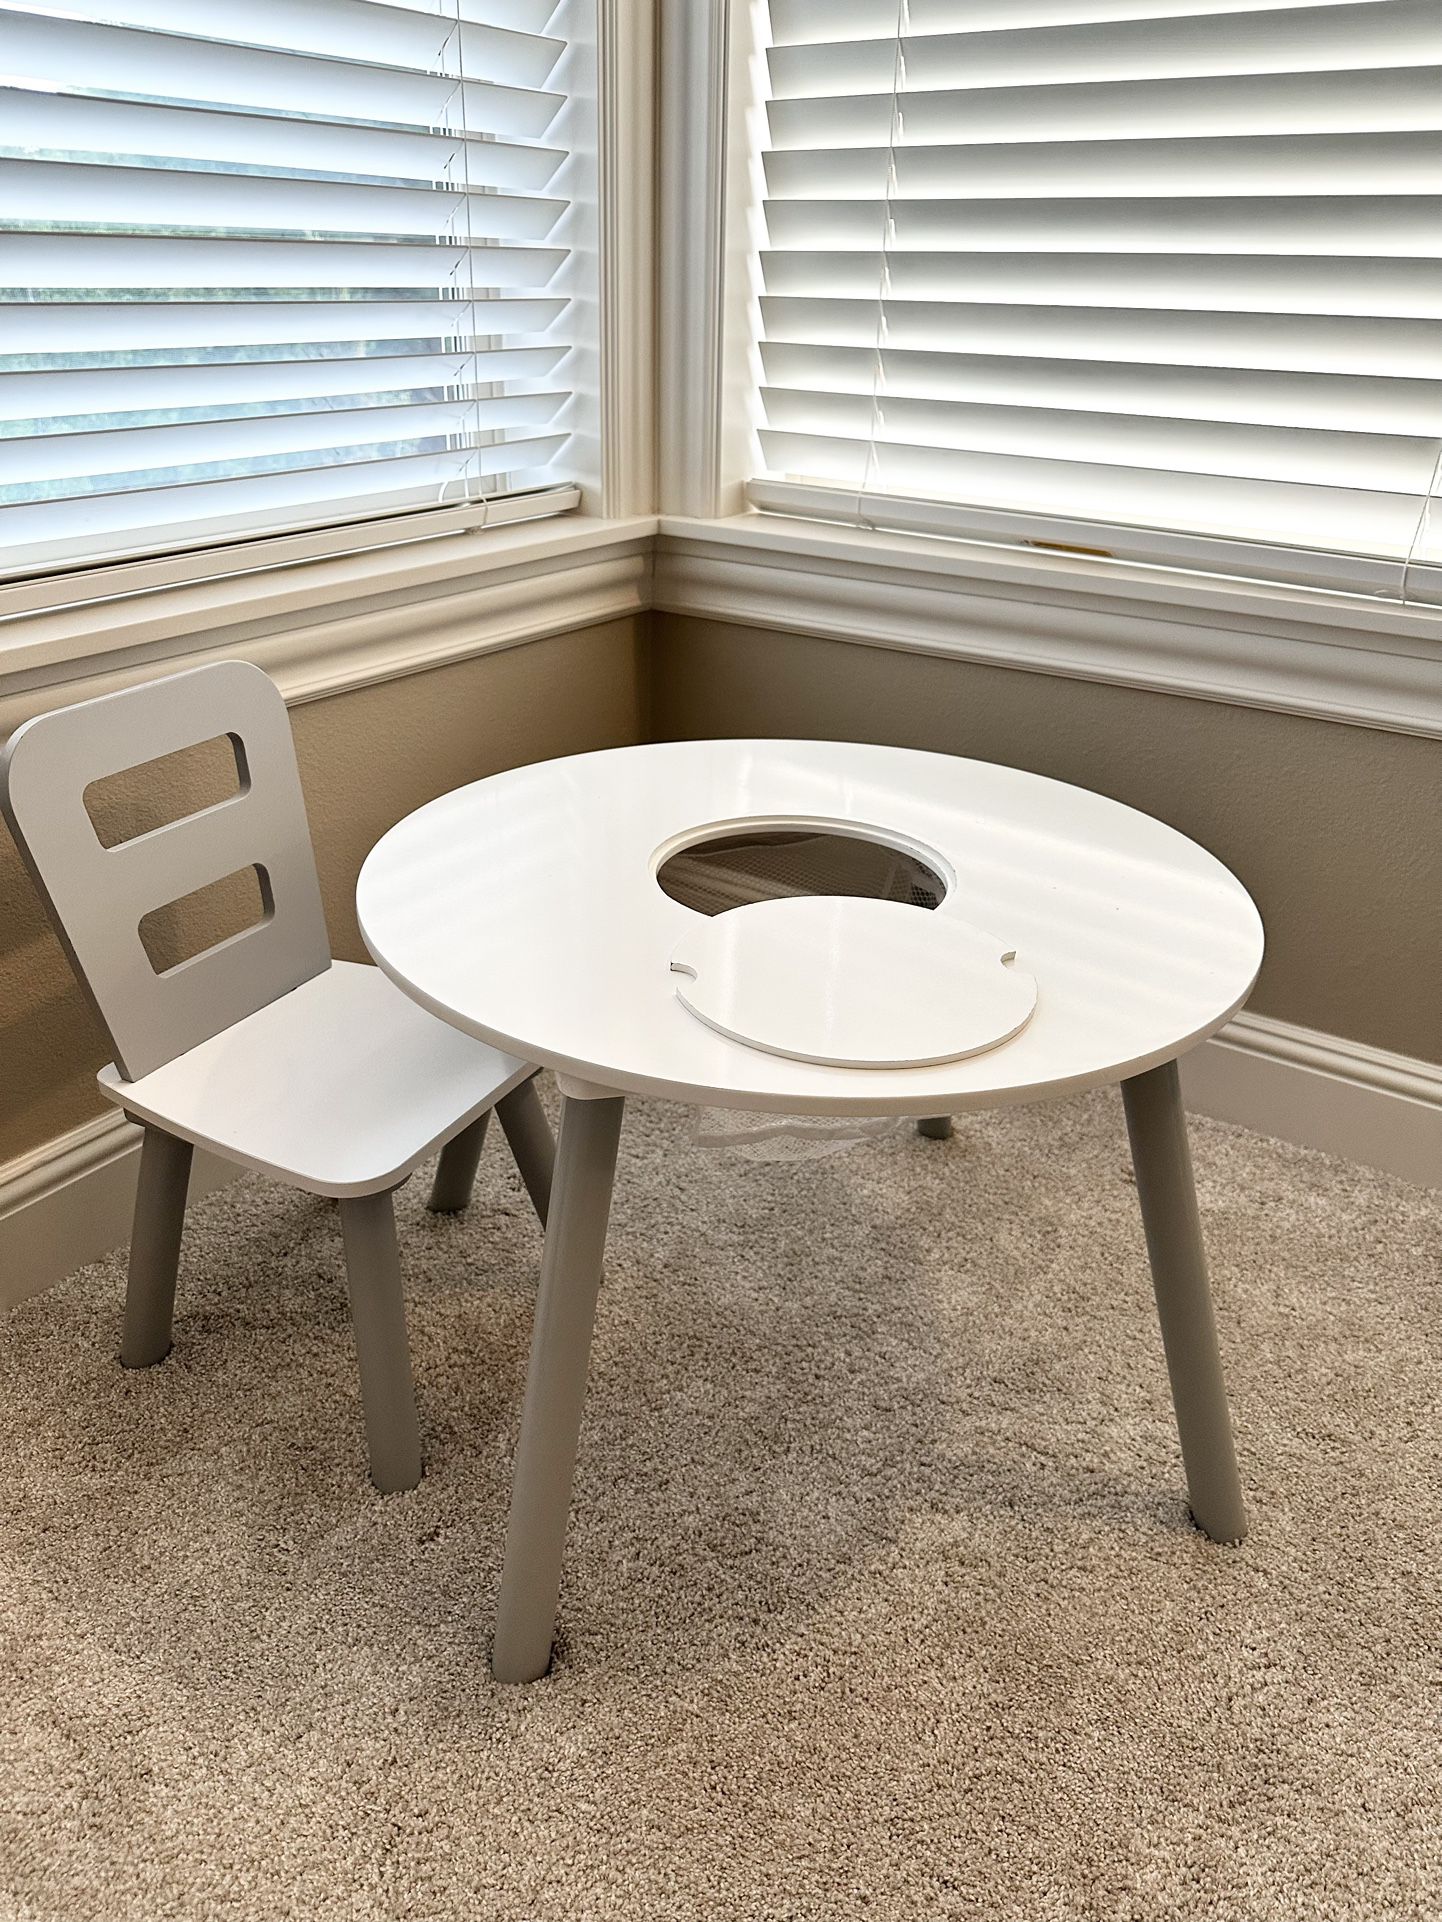 Wooden Toddler Table 